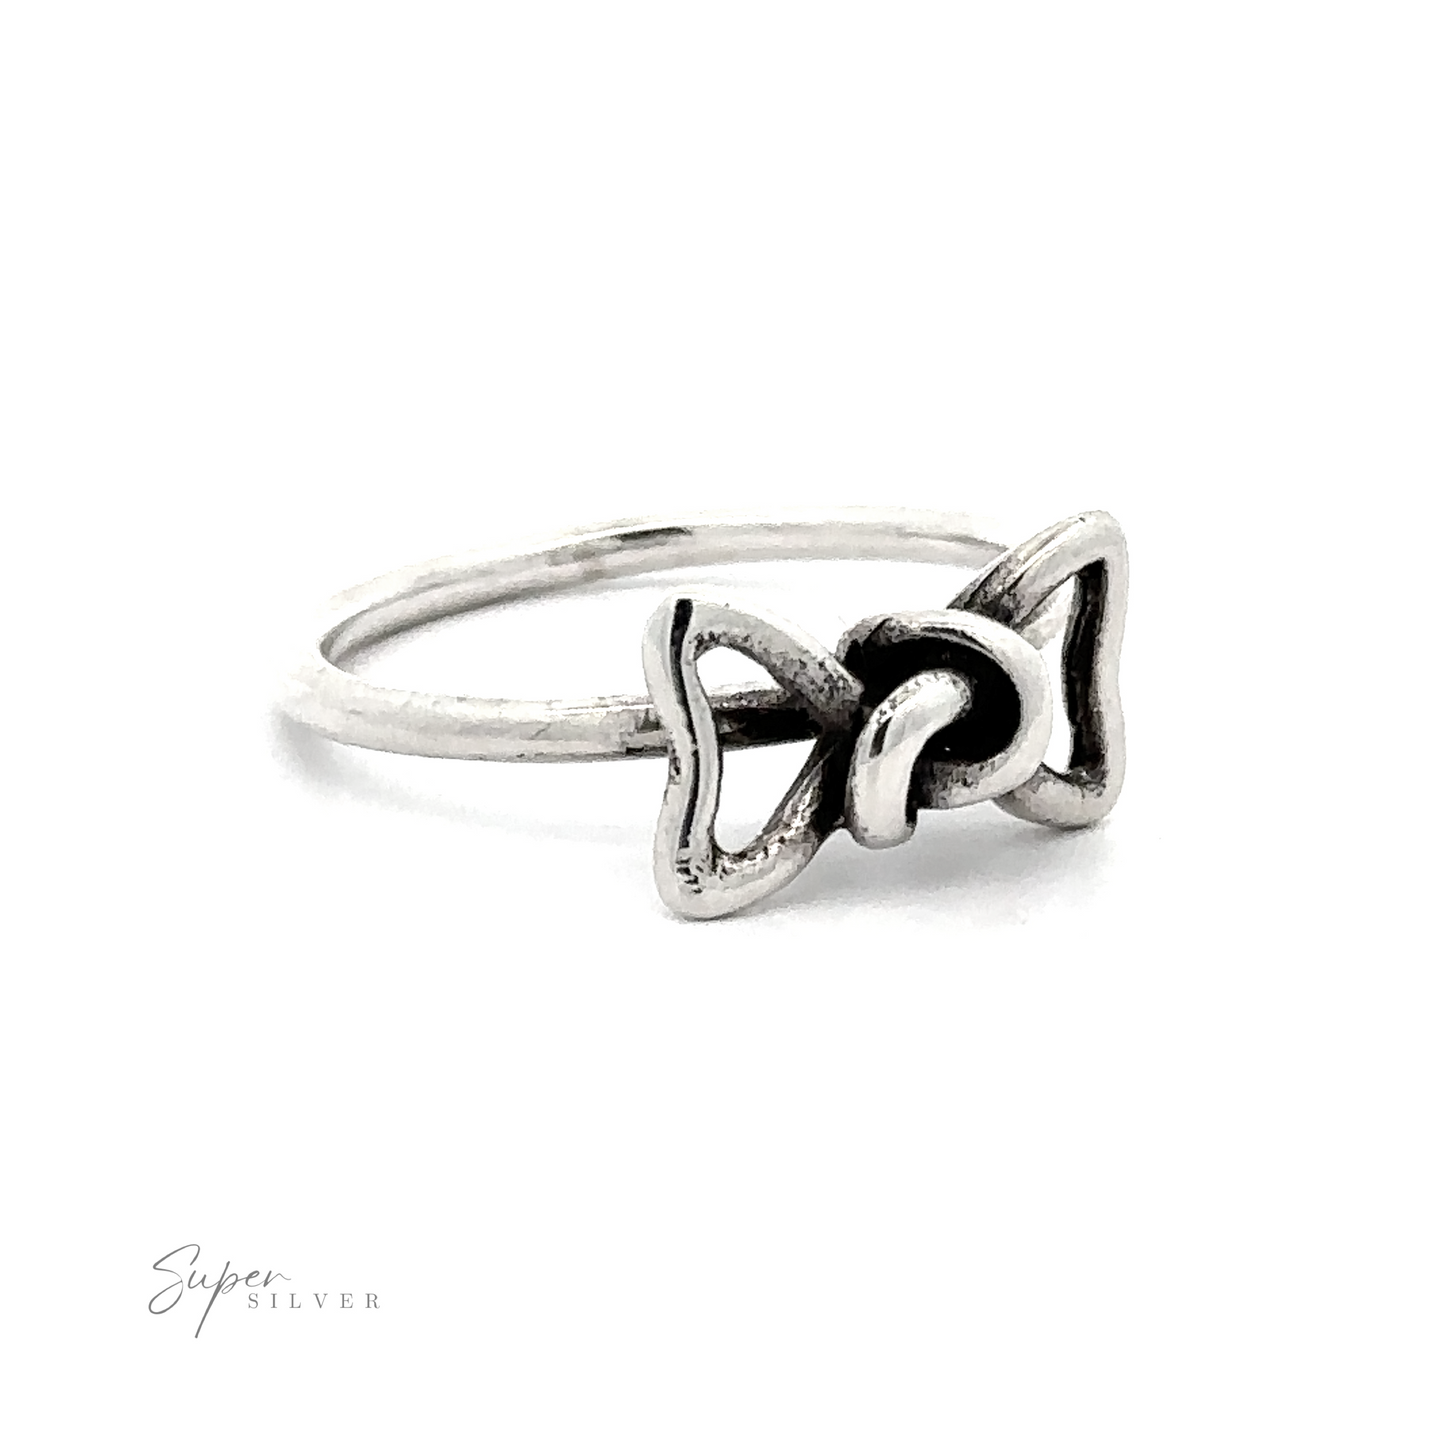 A Wire Bow Ring with a knotted center, perfect for a cute addition to any outfit.